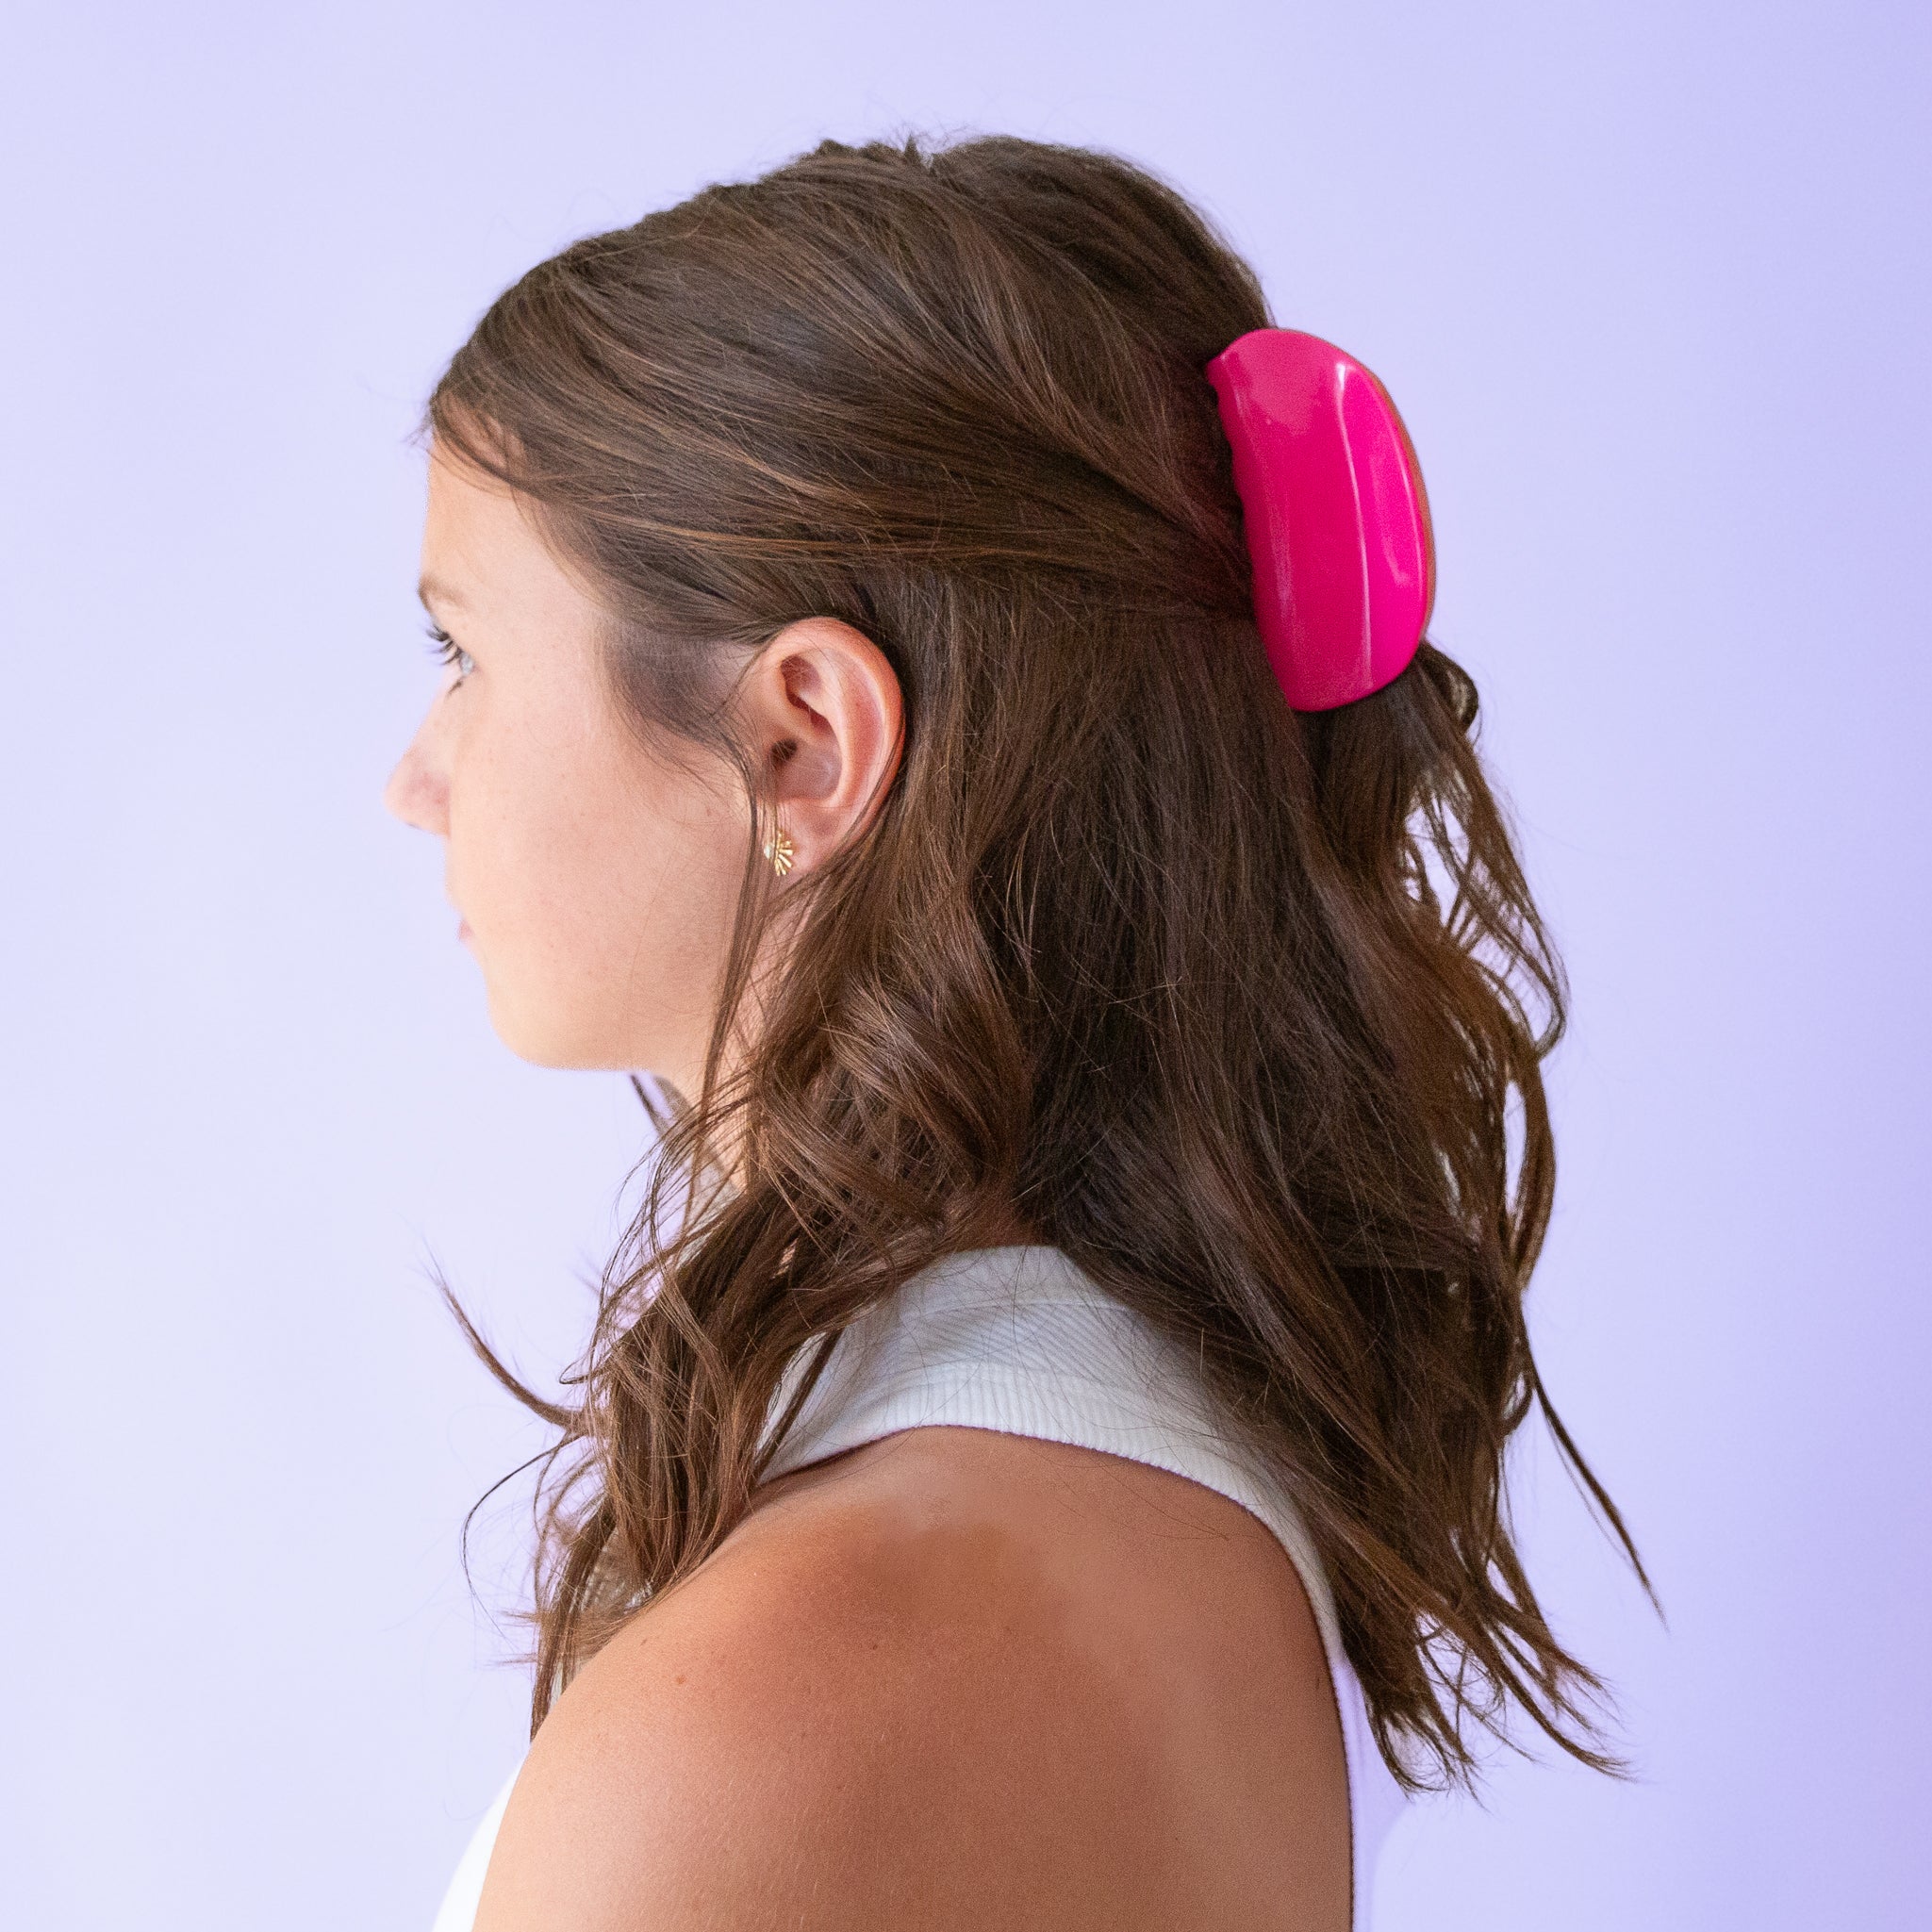 A two-toned, pink and light pink claw clip with rounded edges.